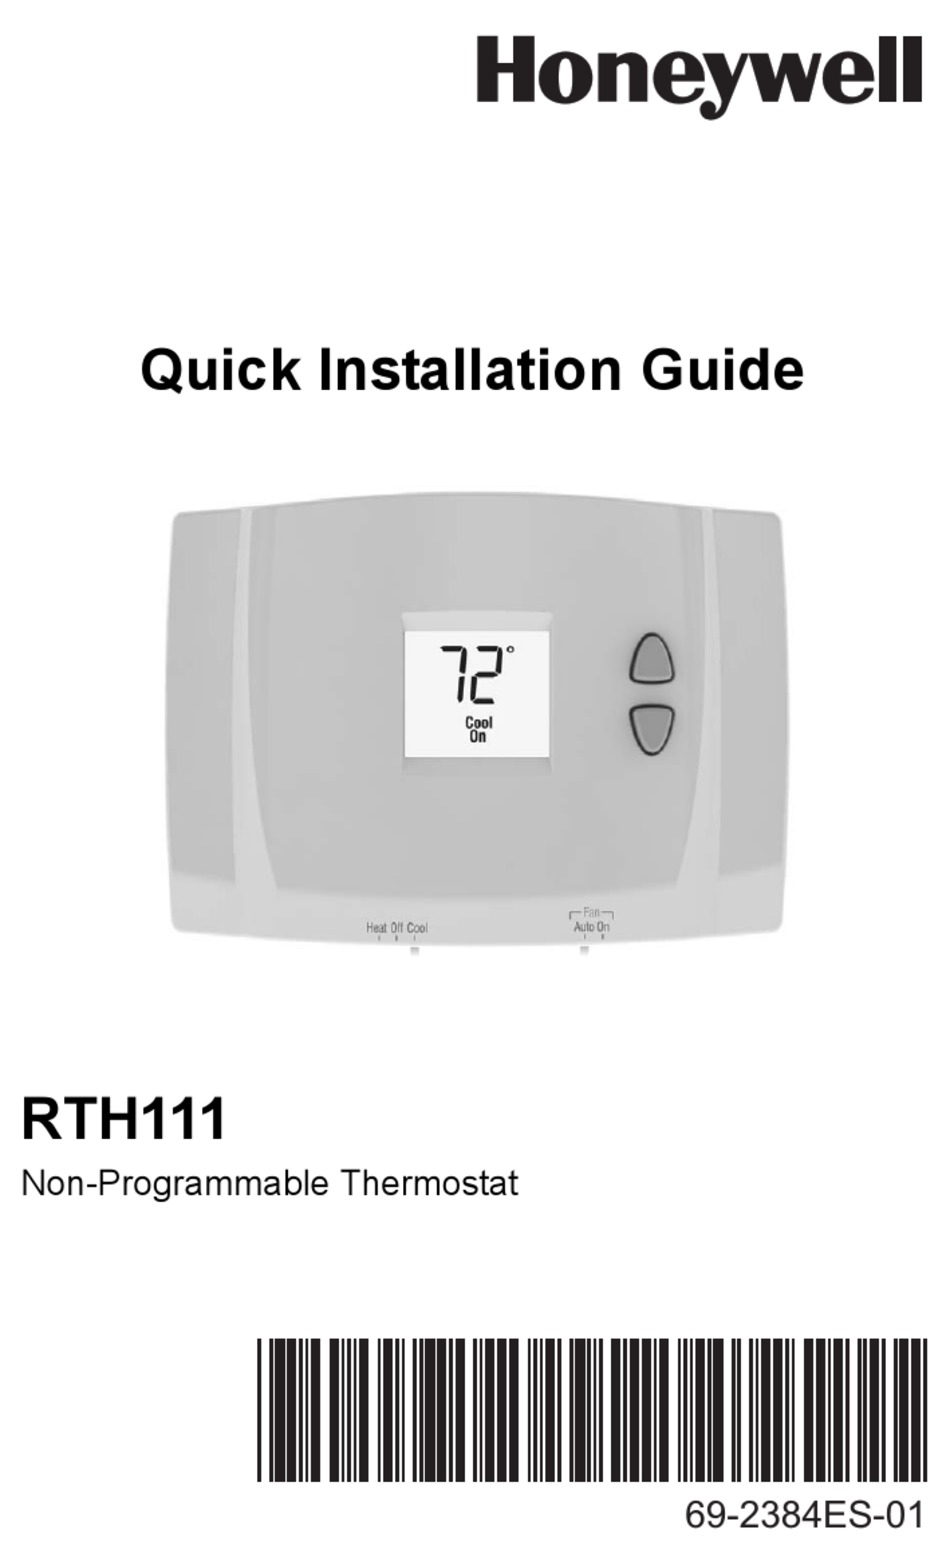 Honeywell Non Programmable Thermostat Rth111 Wiring Diagram - Search